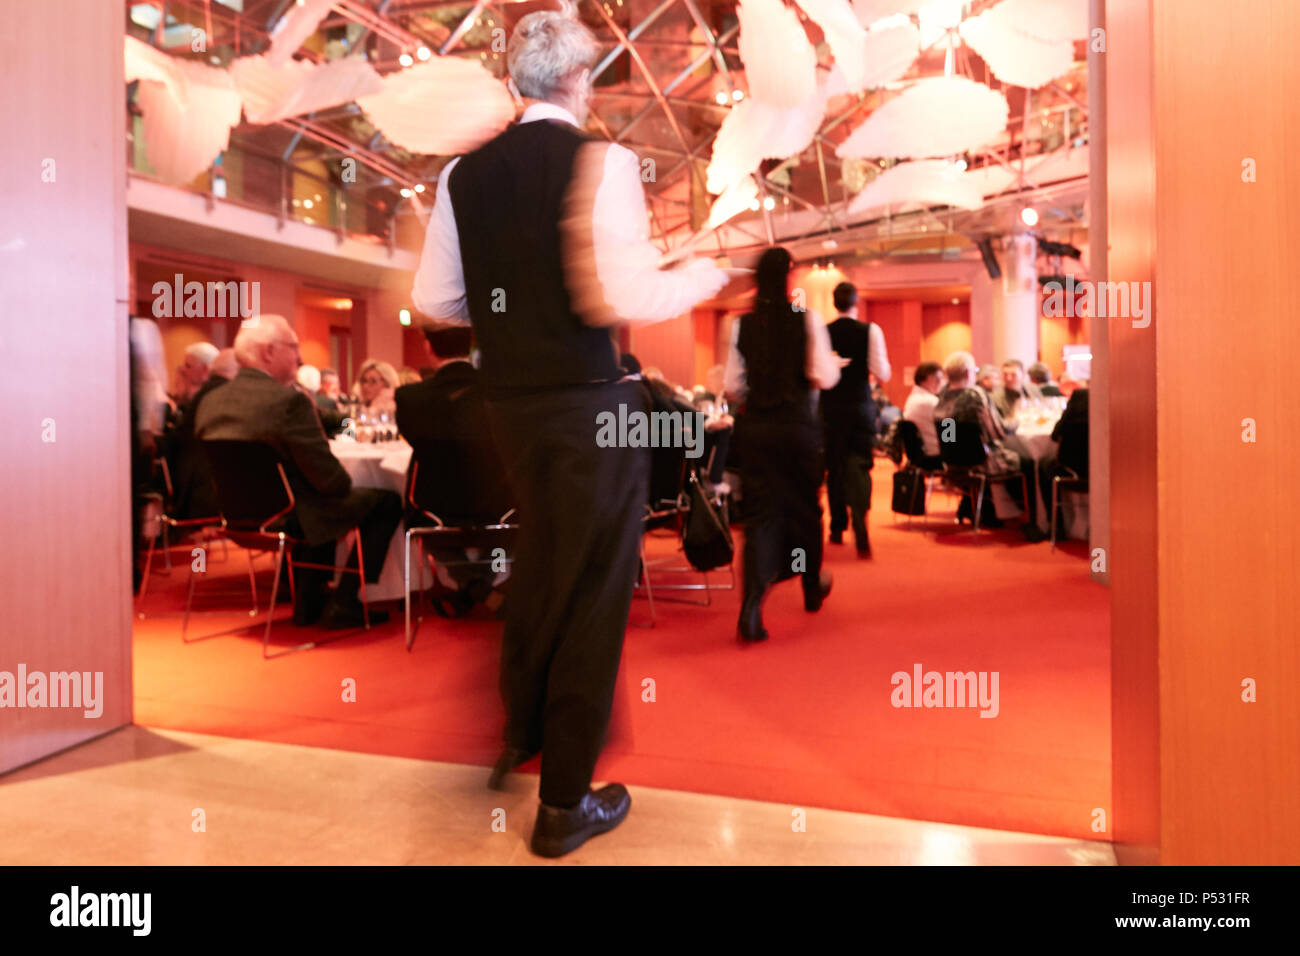 Berlin, Germany - Service staff in elegant wardrobe while applying the food at a festive evening event. Stock Photo